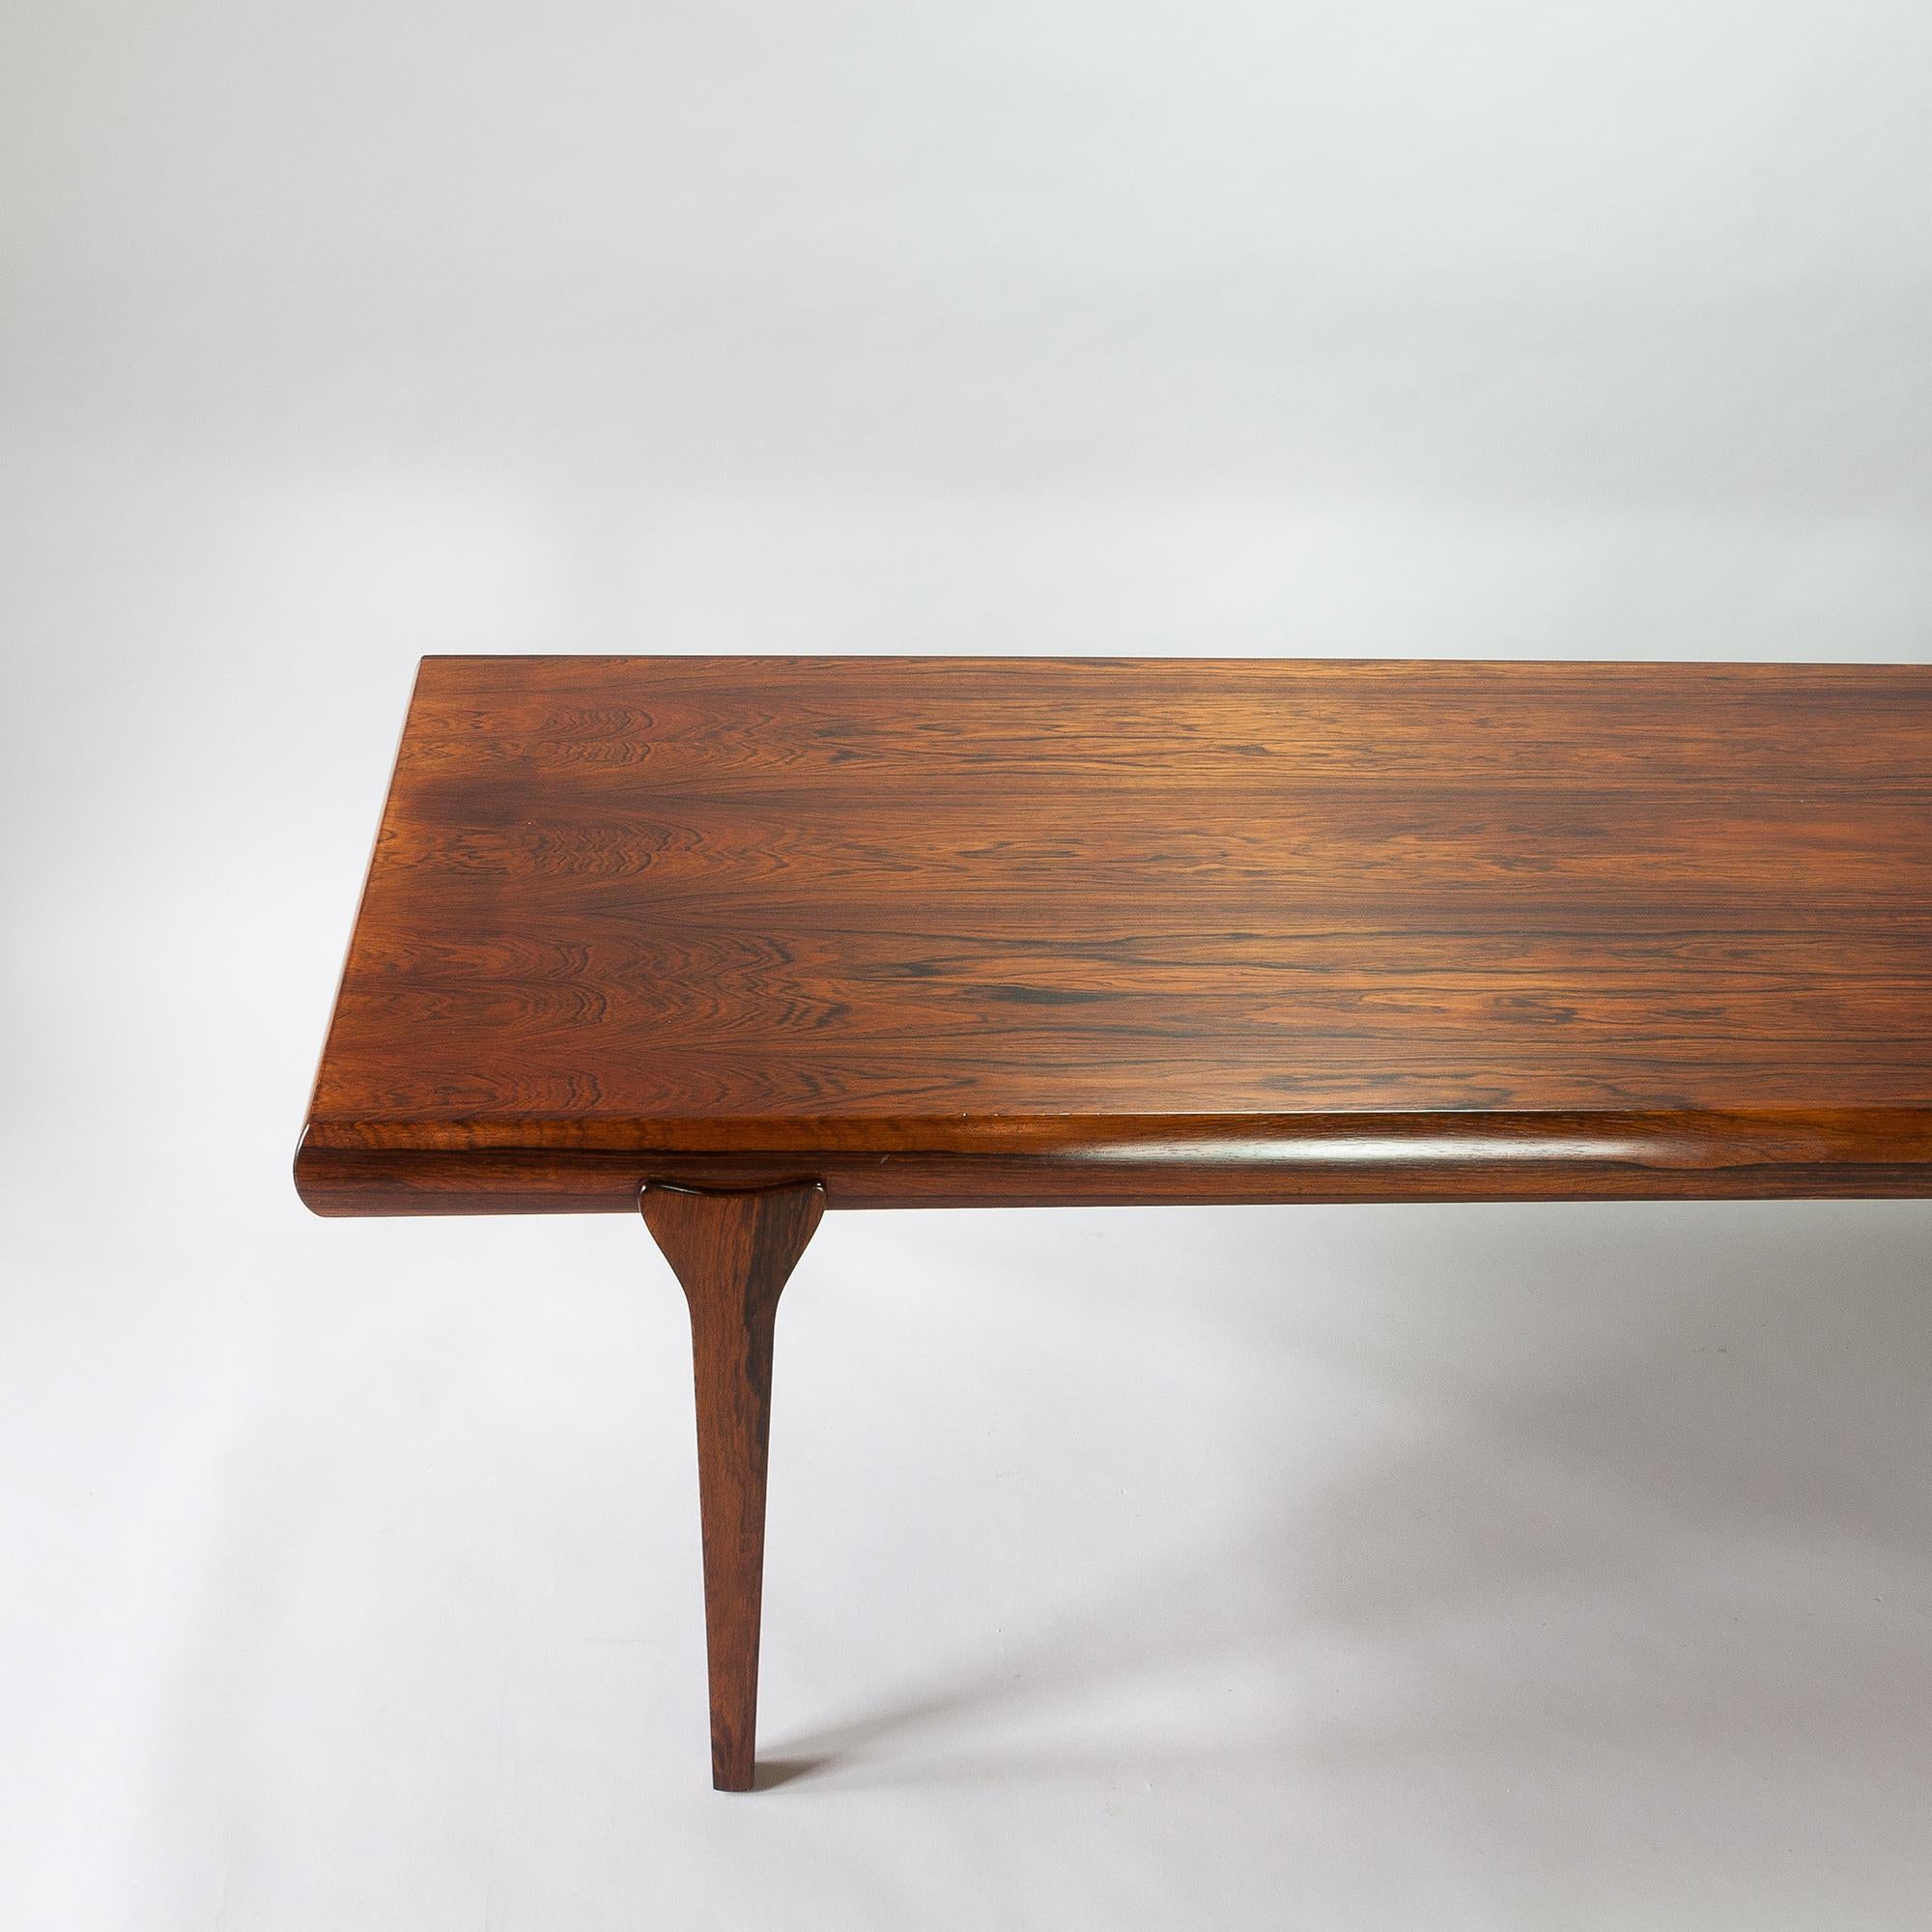 A stunning rosewood coffee table by Johannes Andersen for CFC Silkeborg. Fully re-polished to bring out the beauty of the Brazilian rosewood. The table extends by 30cms at one end and at the other there is a 60cms deep drawer for coasters and place